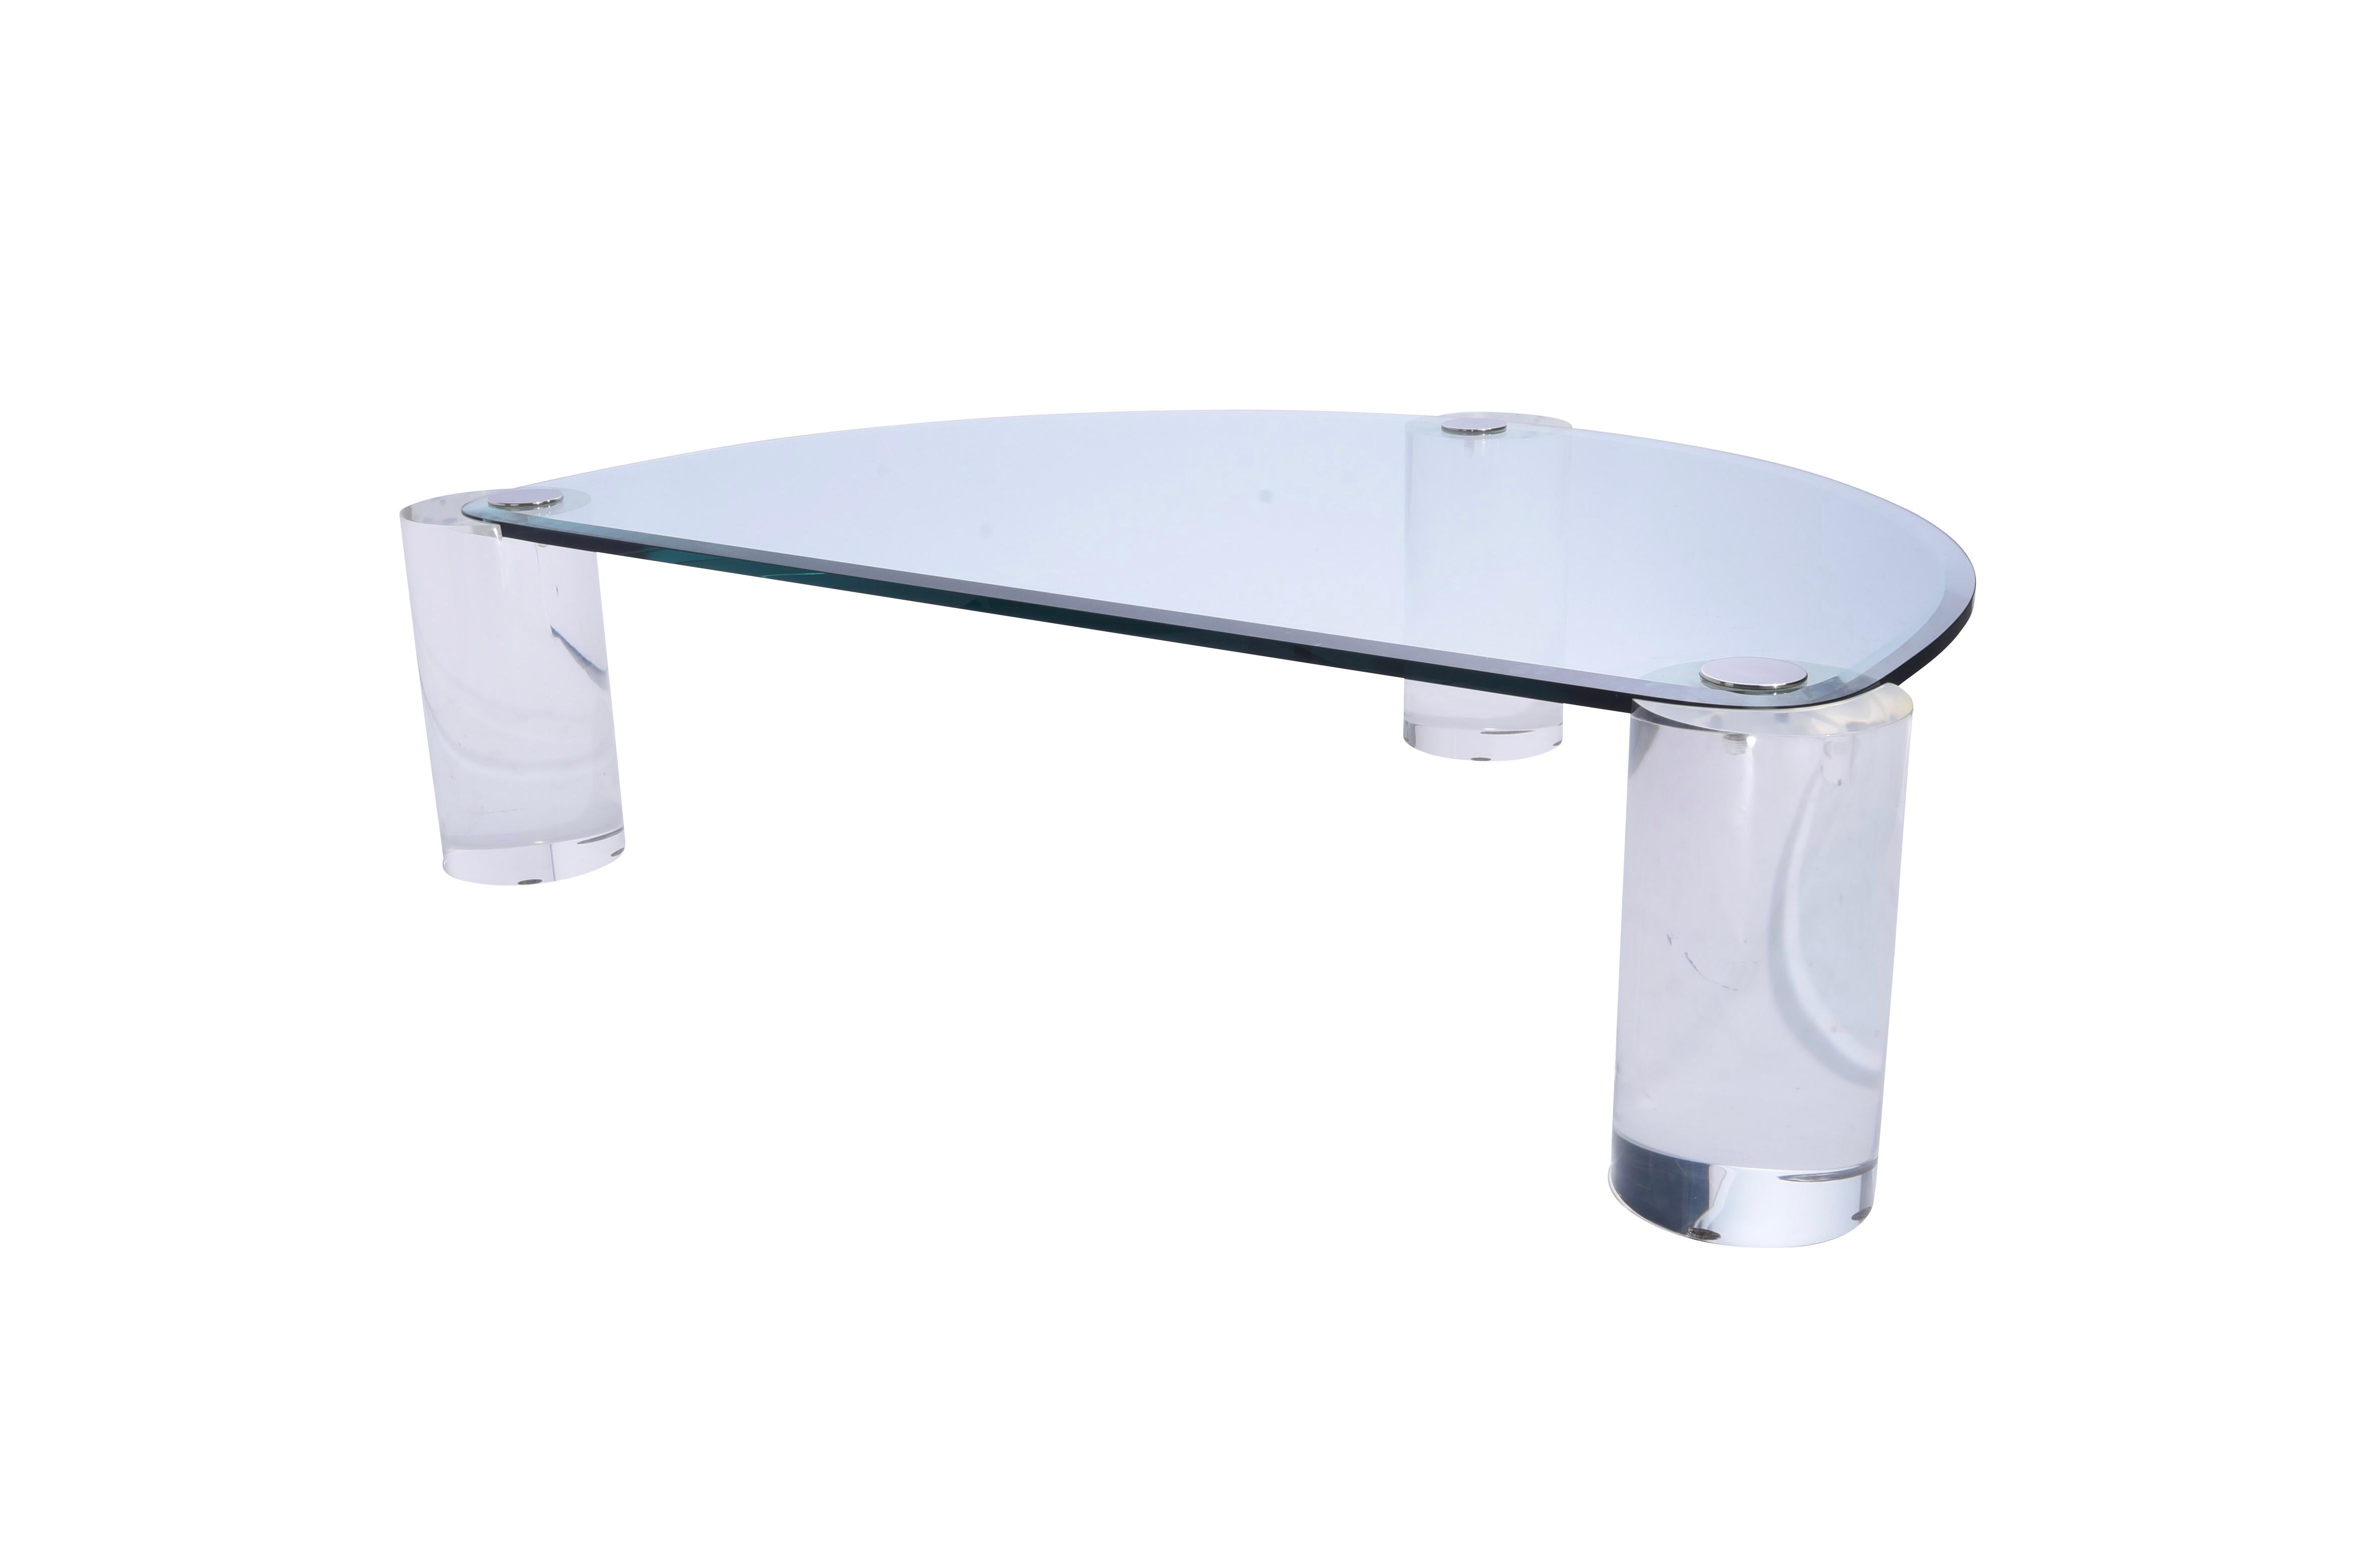 Lucite sculpture leg coffee table by Karl Springer with glass top.